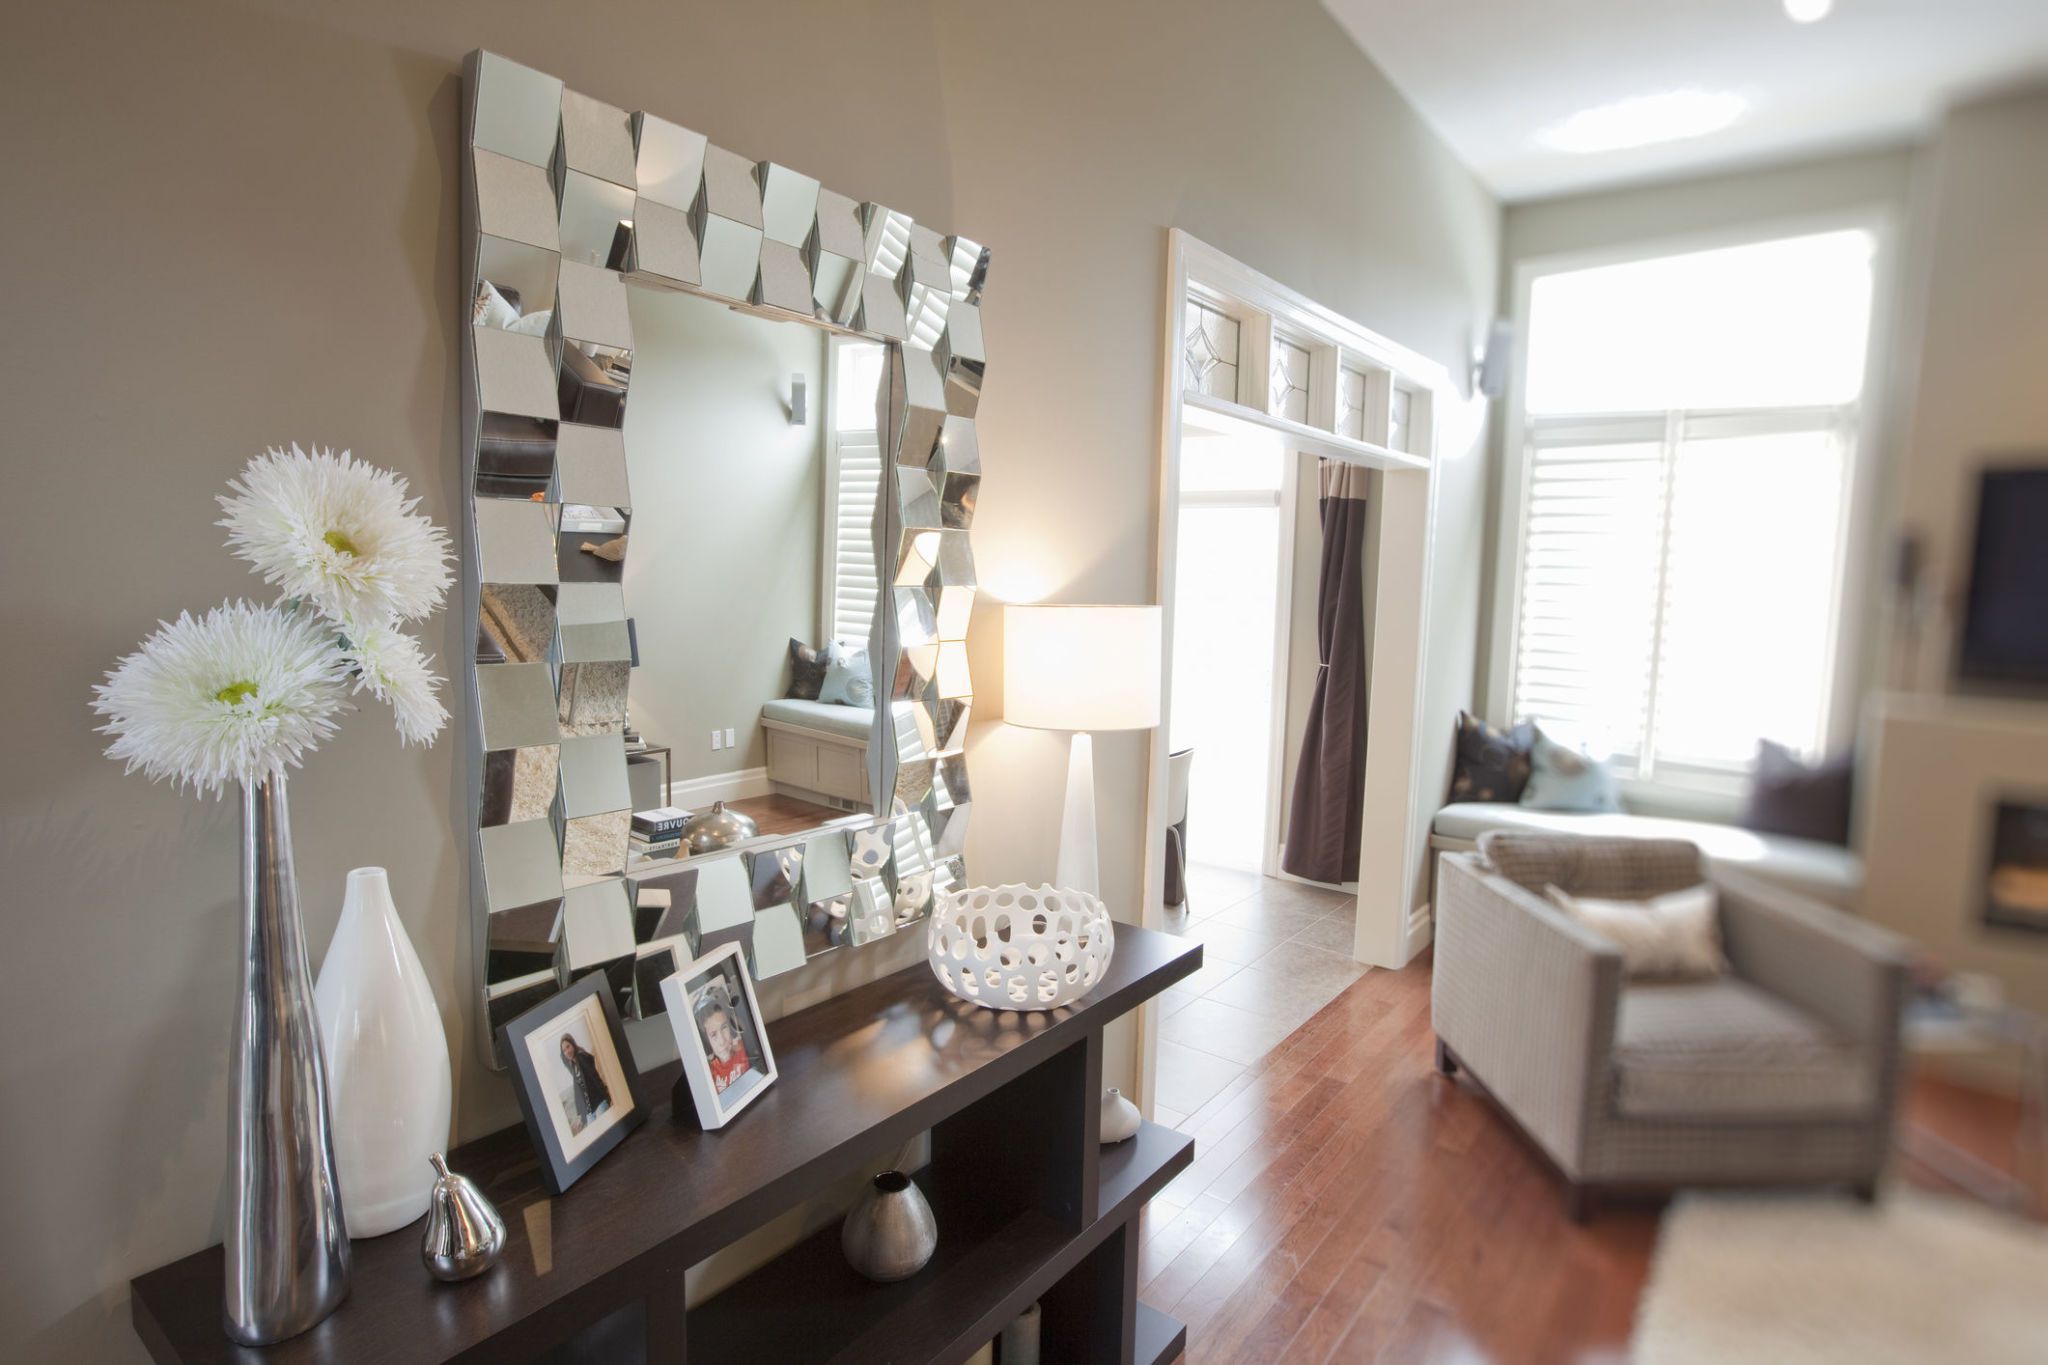 Why People Use Wall Mirrors in Homes?